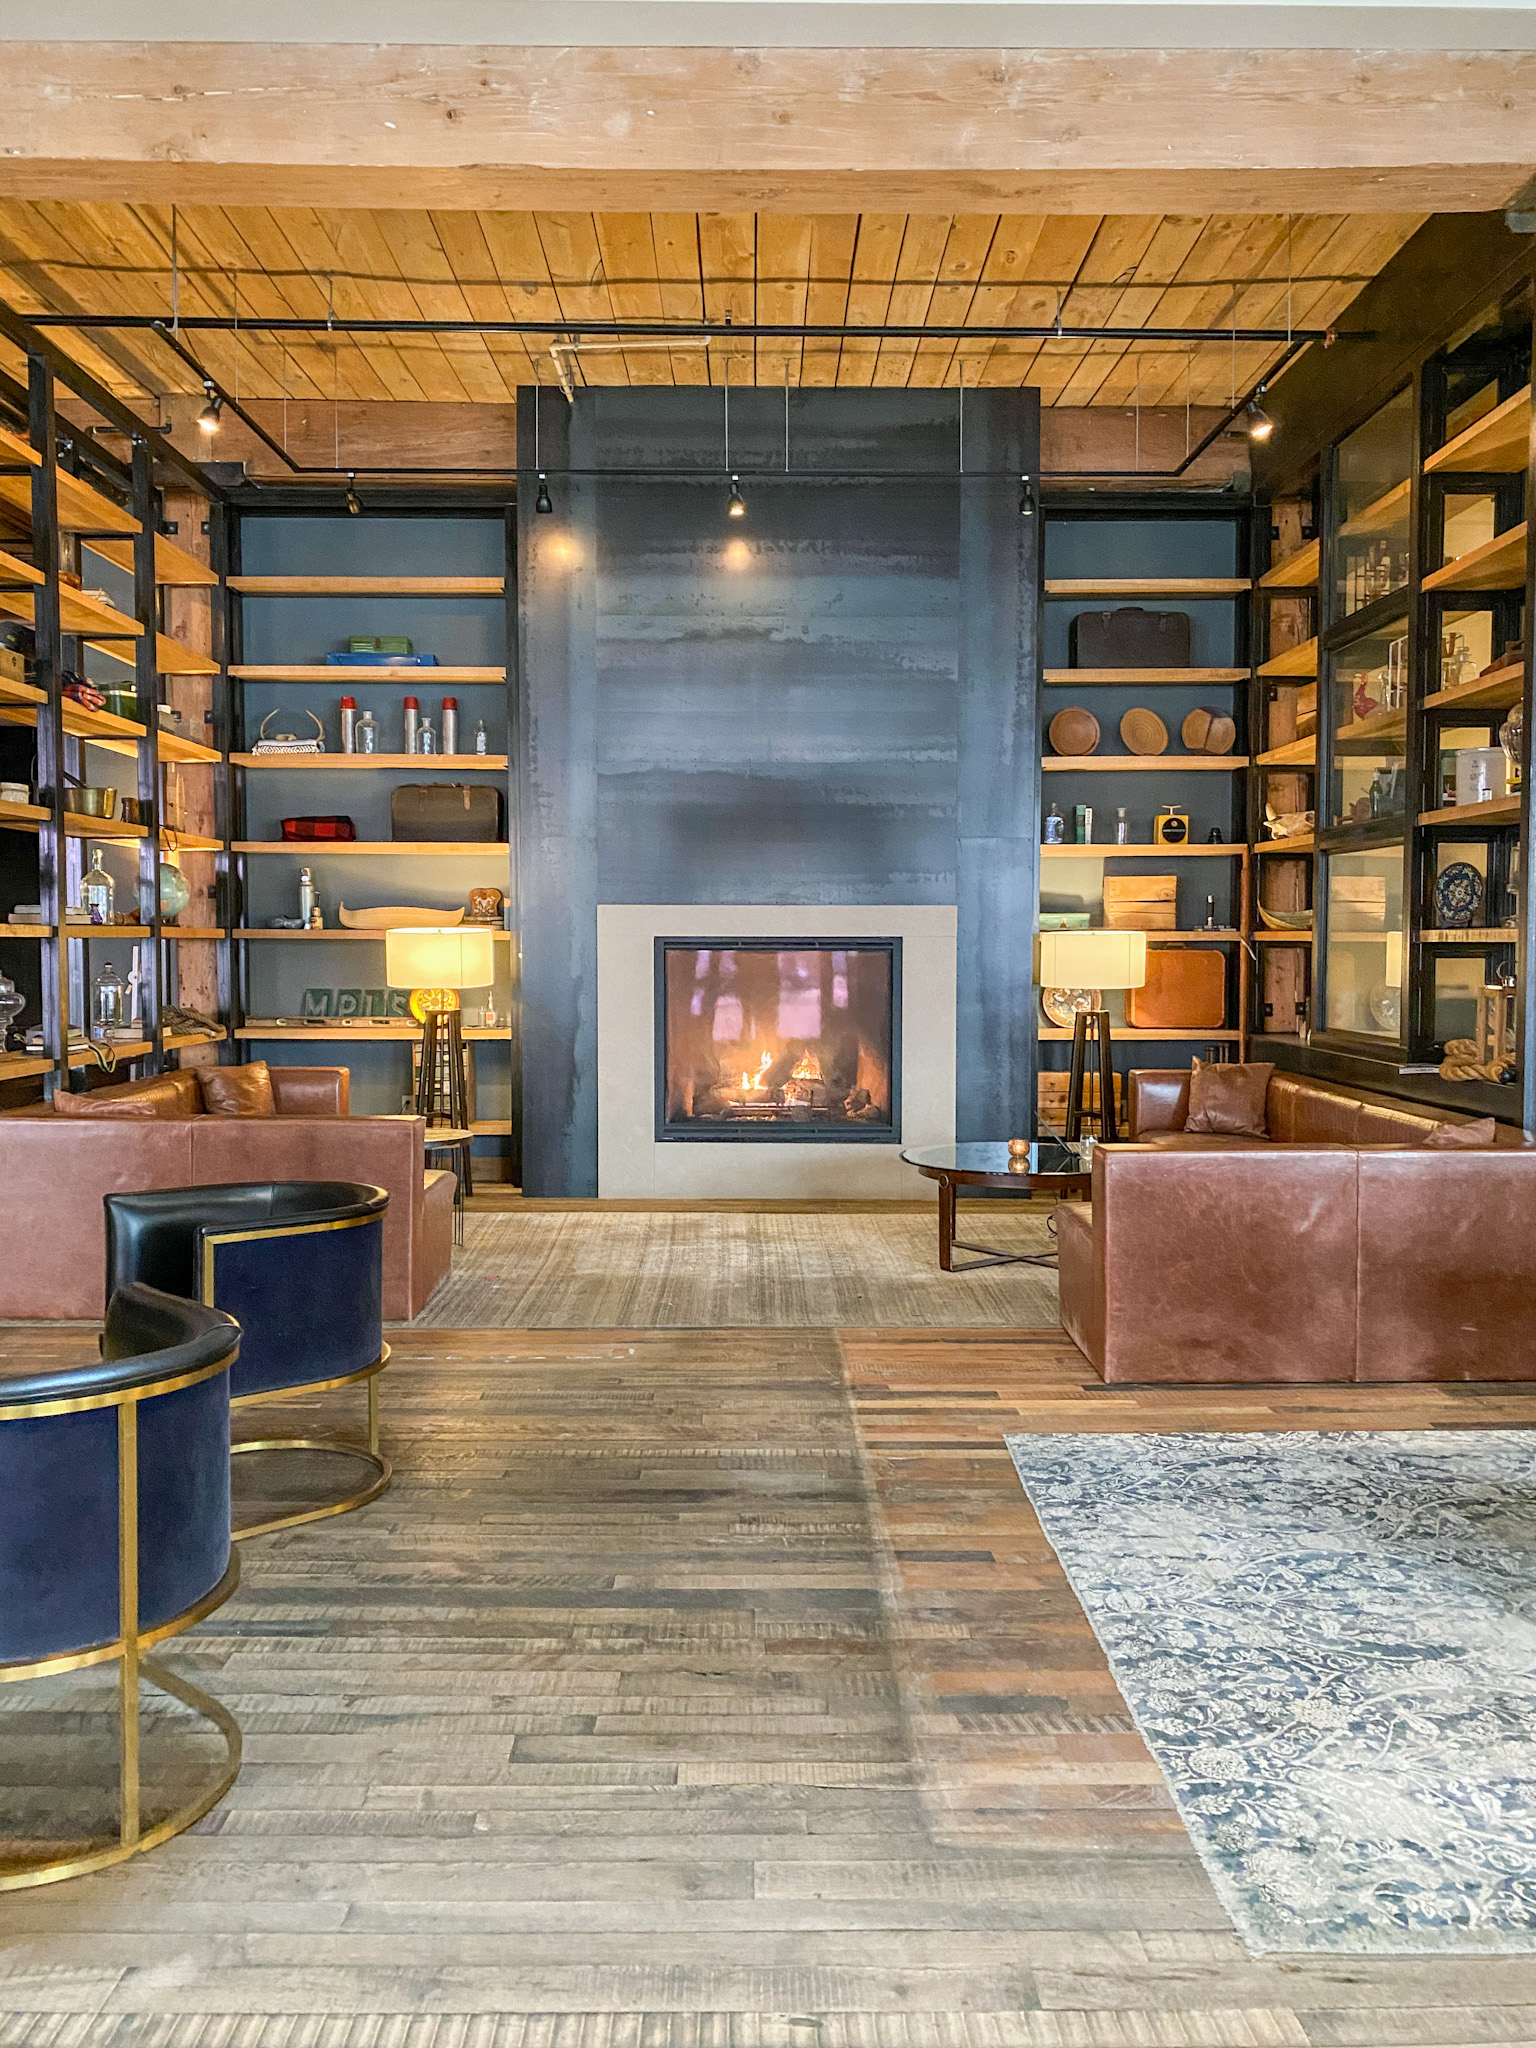 The Hewing Hotel<h2>Minneapolis, MN<h2>